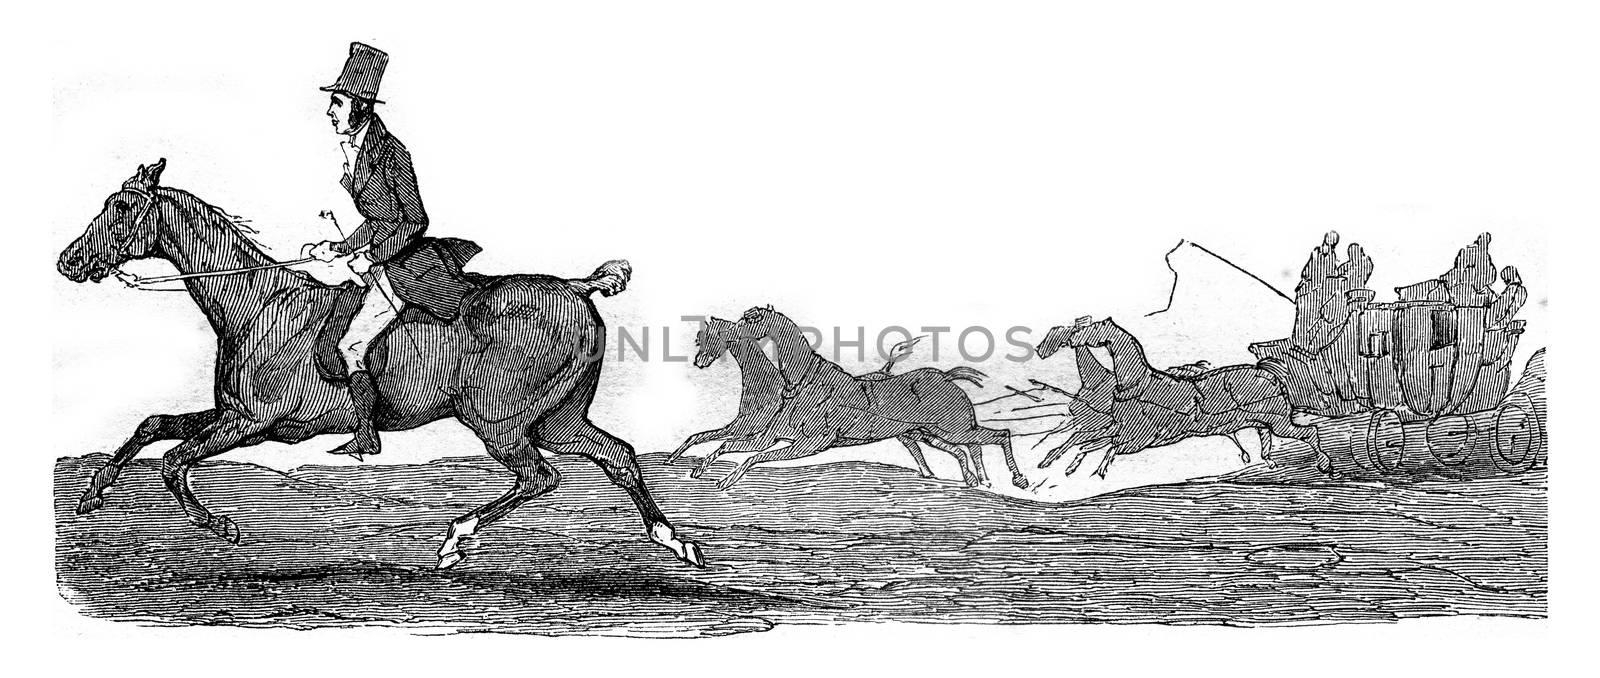 Kob, little horse half-blood who struggle with speed trunk Boston for thirty-three leagues, vintage engraved illustration. Magasin Pittoresque 1845.
